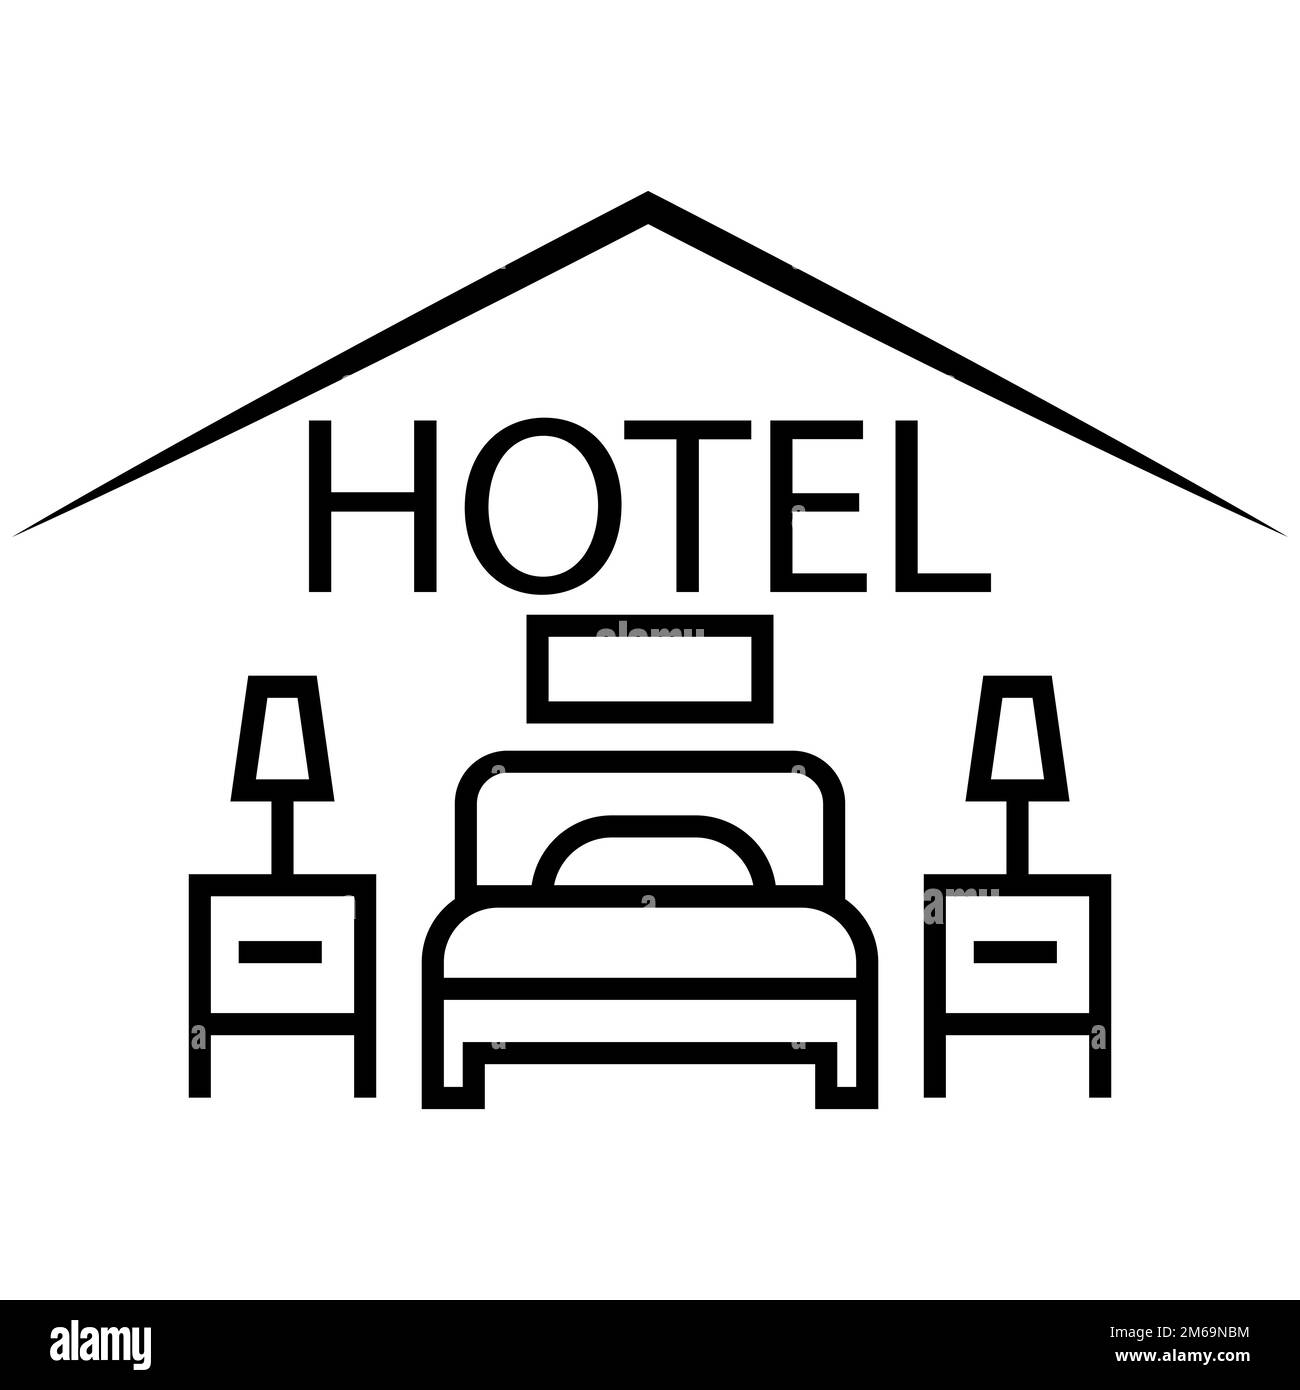 Hotel icon vector, room tourism holiday building, pictogram illustration travel Stock Vector